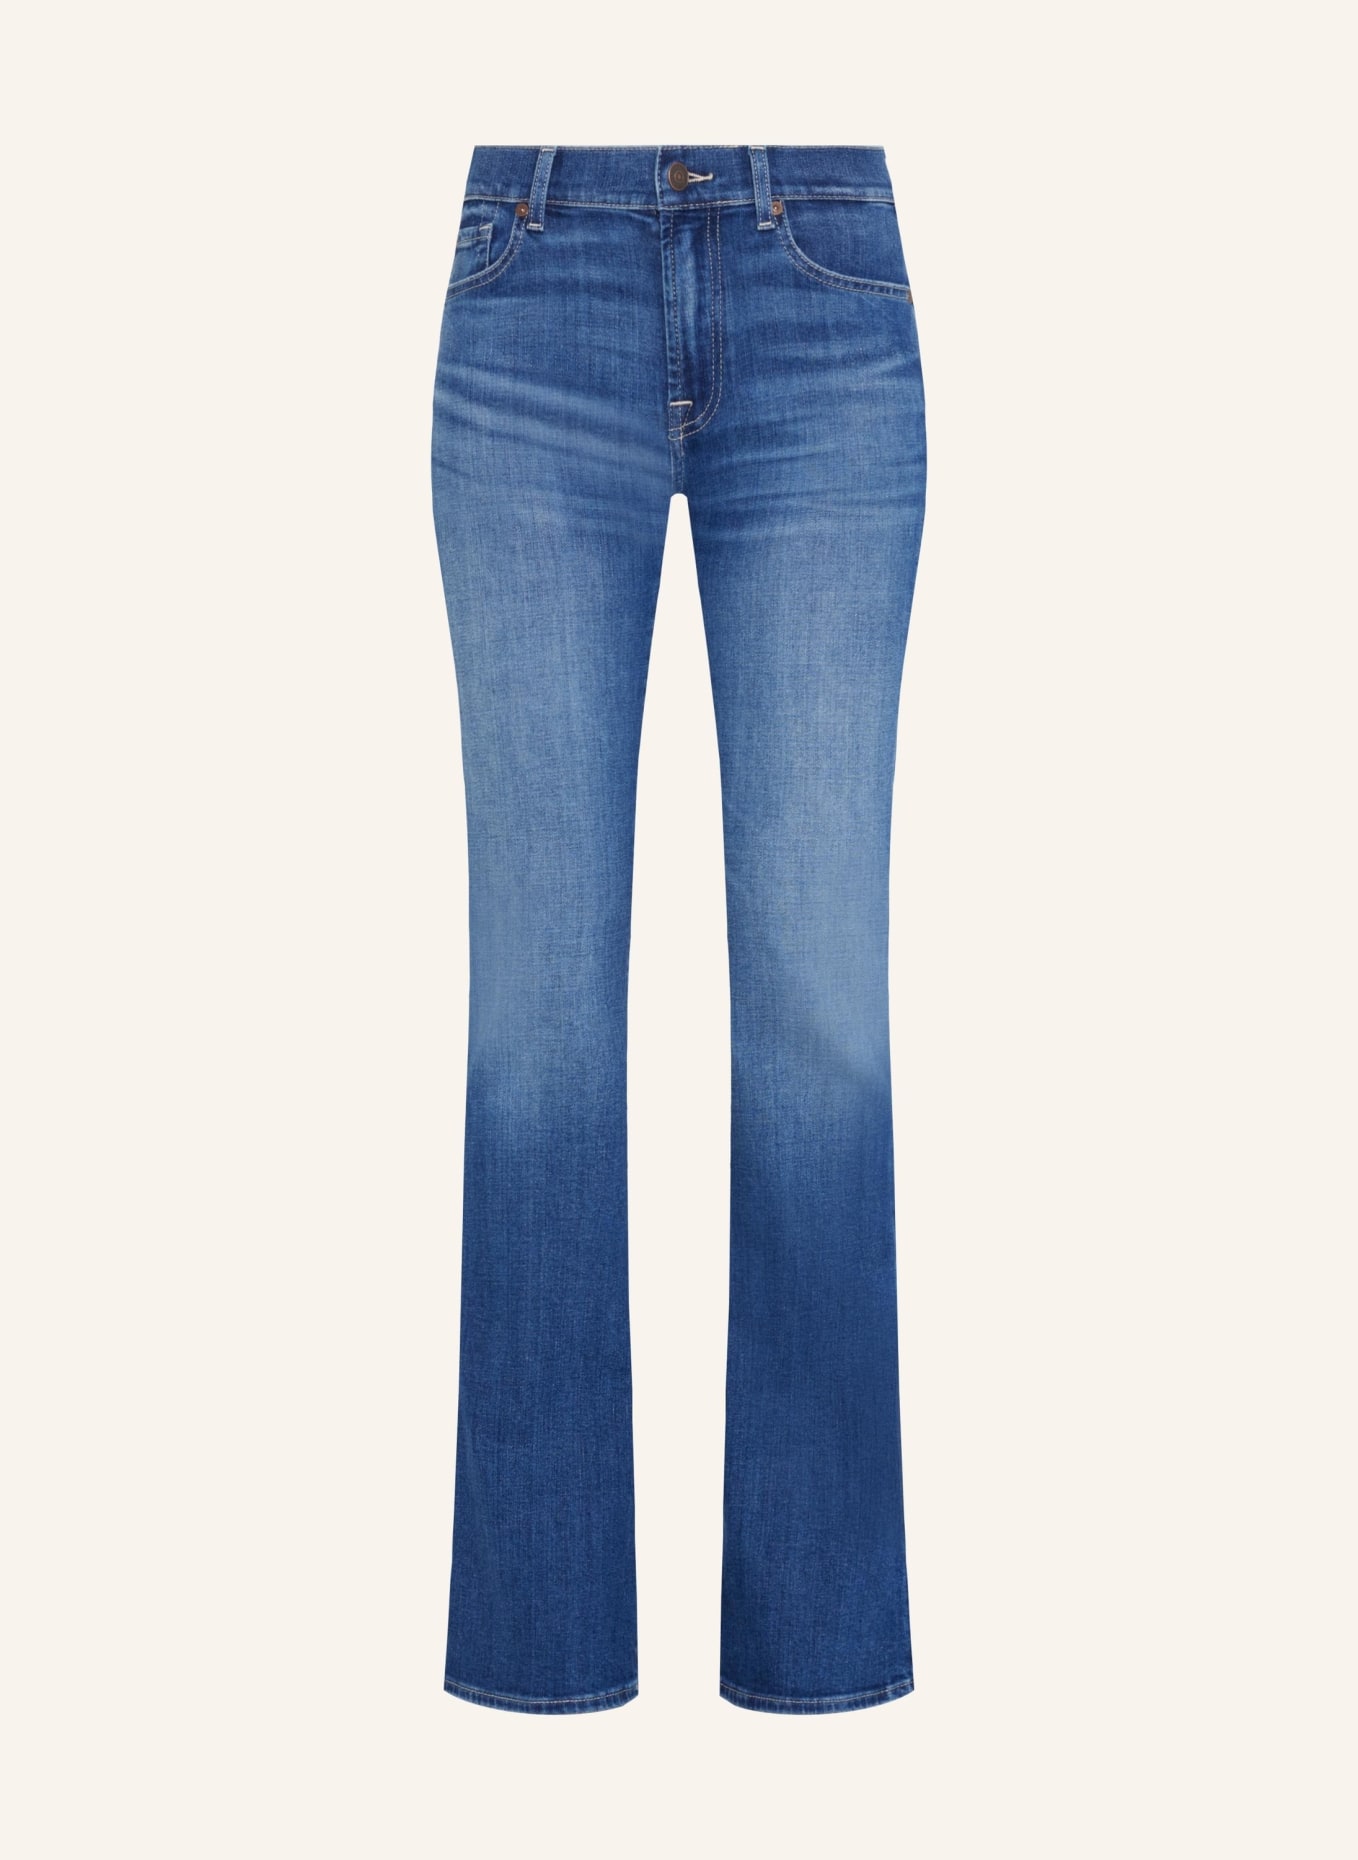 7 for all mankind Jeans BOOTCUT Bootcut fit, Farbe: BLAU (Bild 1)